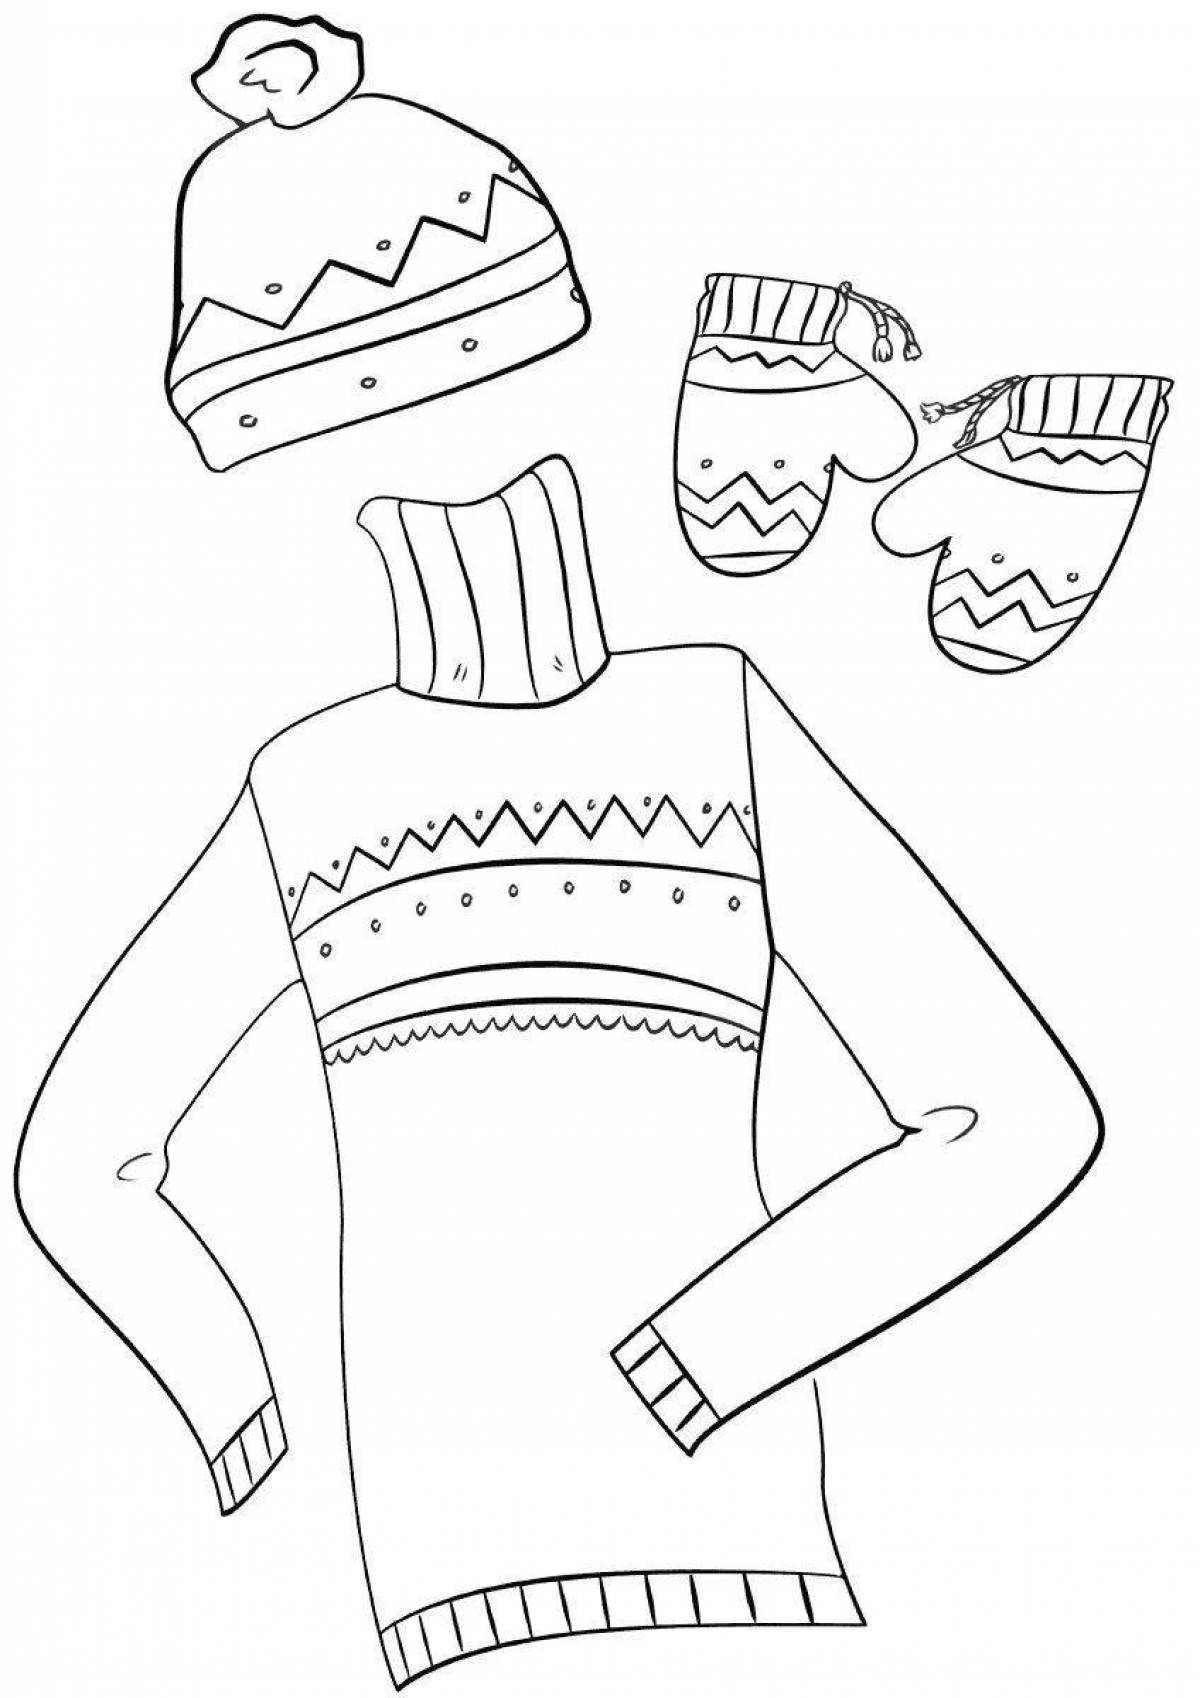 Sweet winter clothes coloring book for 4-5 year olds